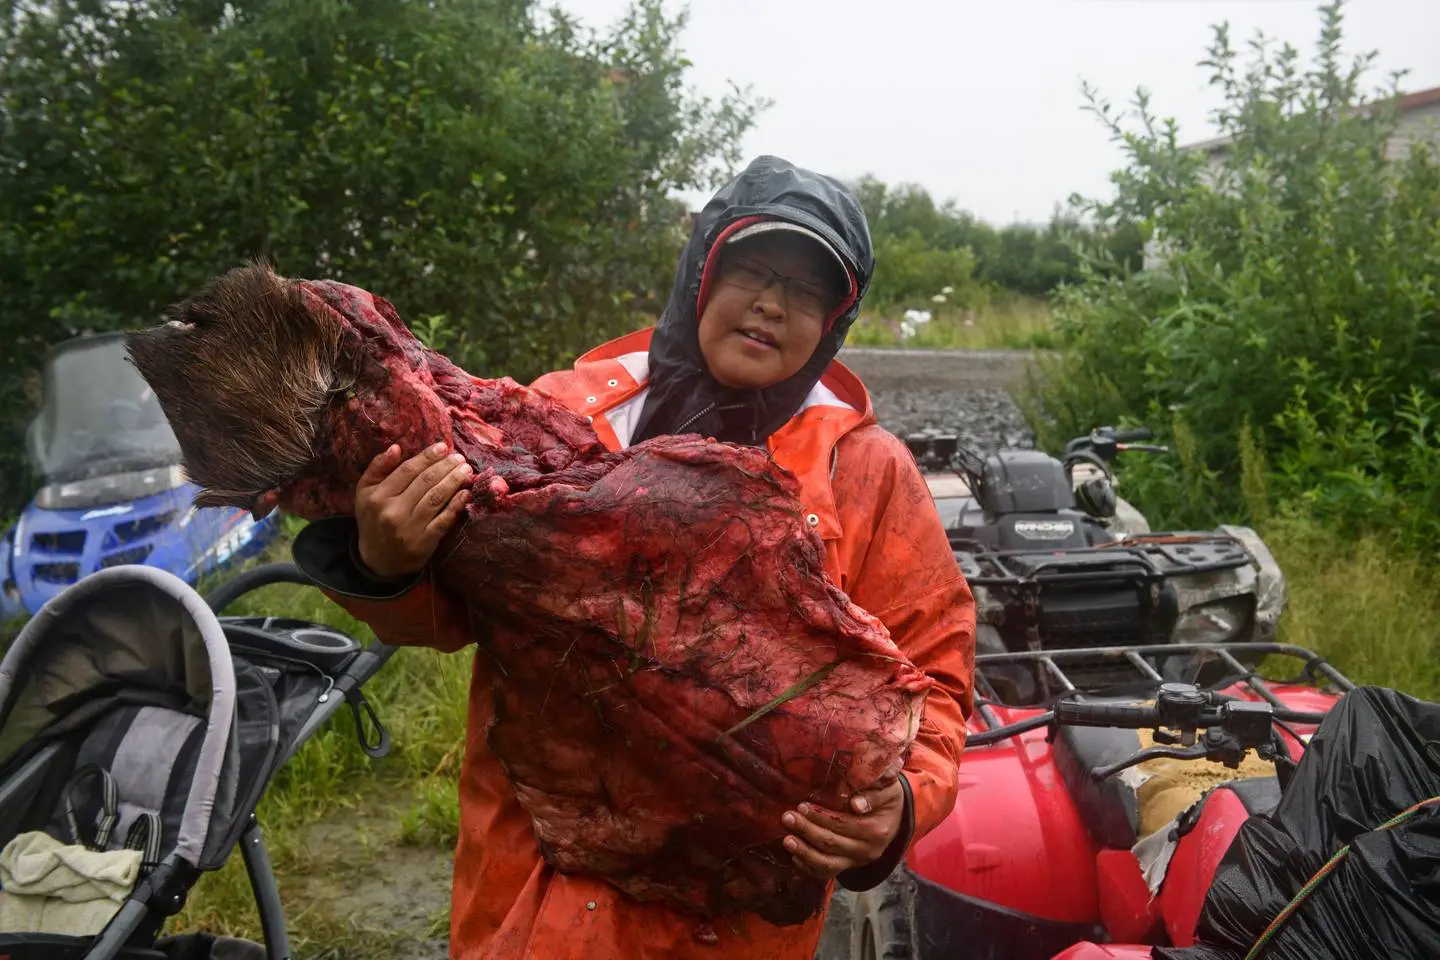 Photo of Emmonak resident holding up deer meat.